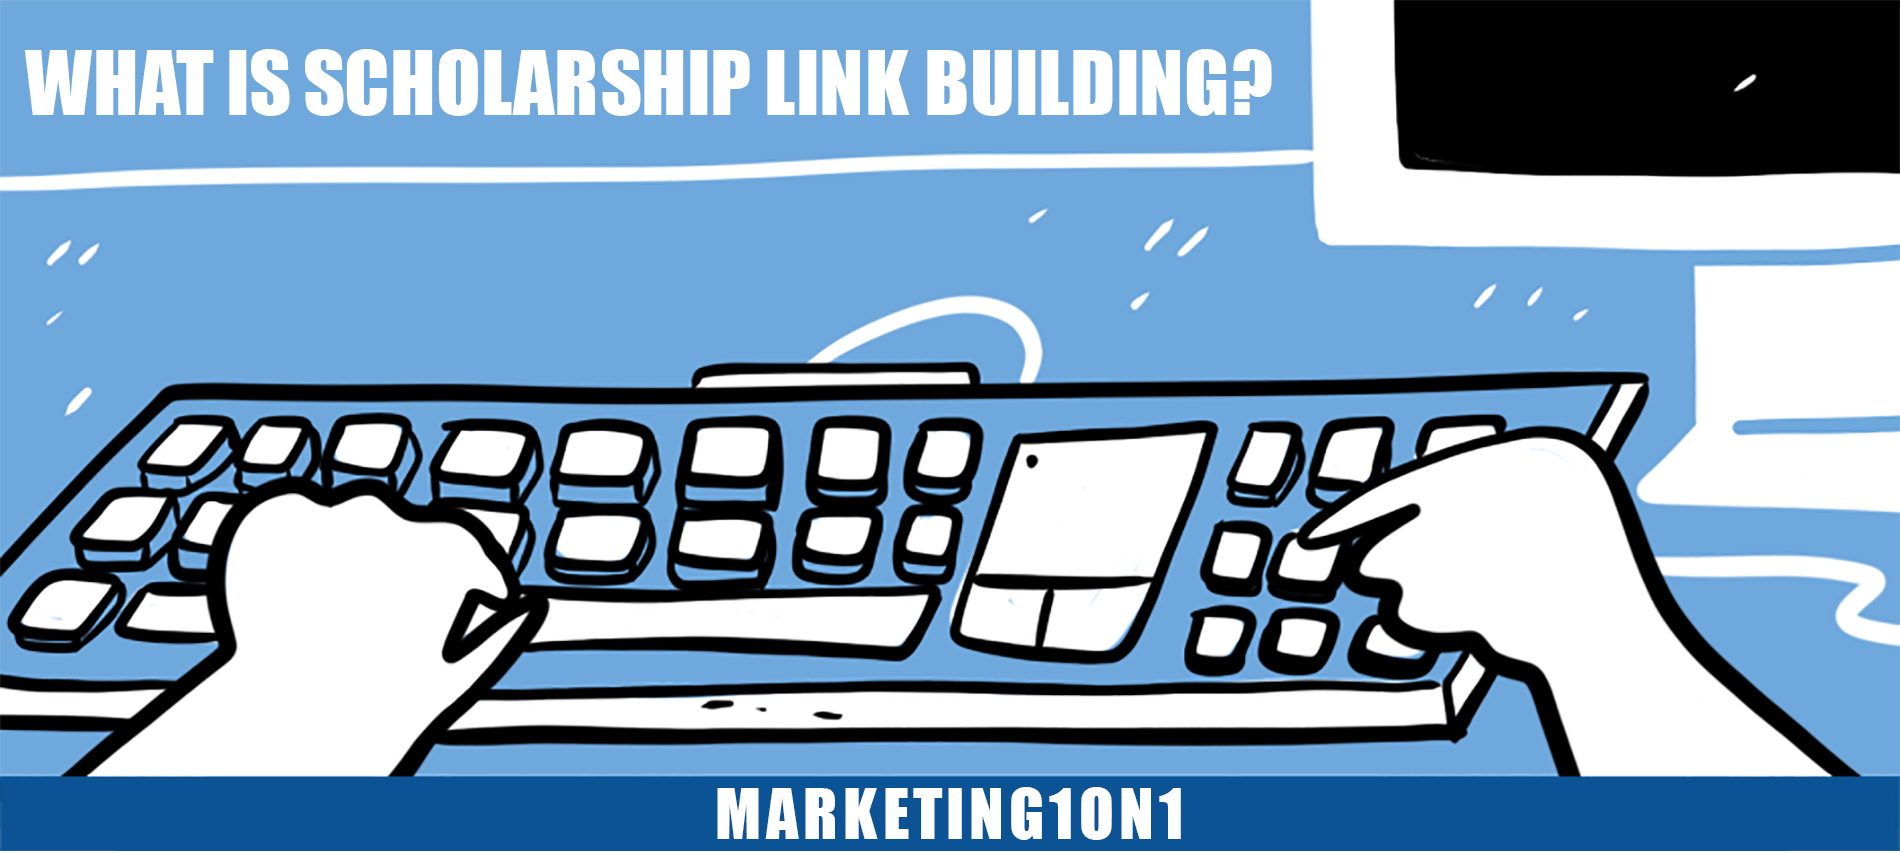 What is scholarship link building?